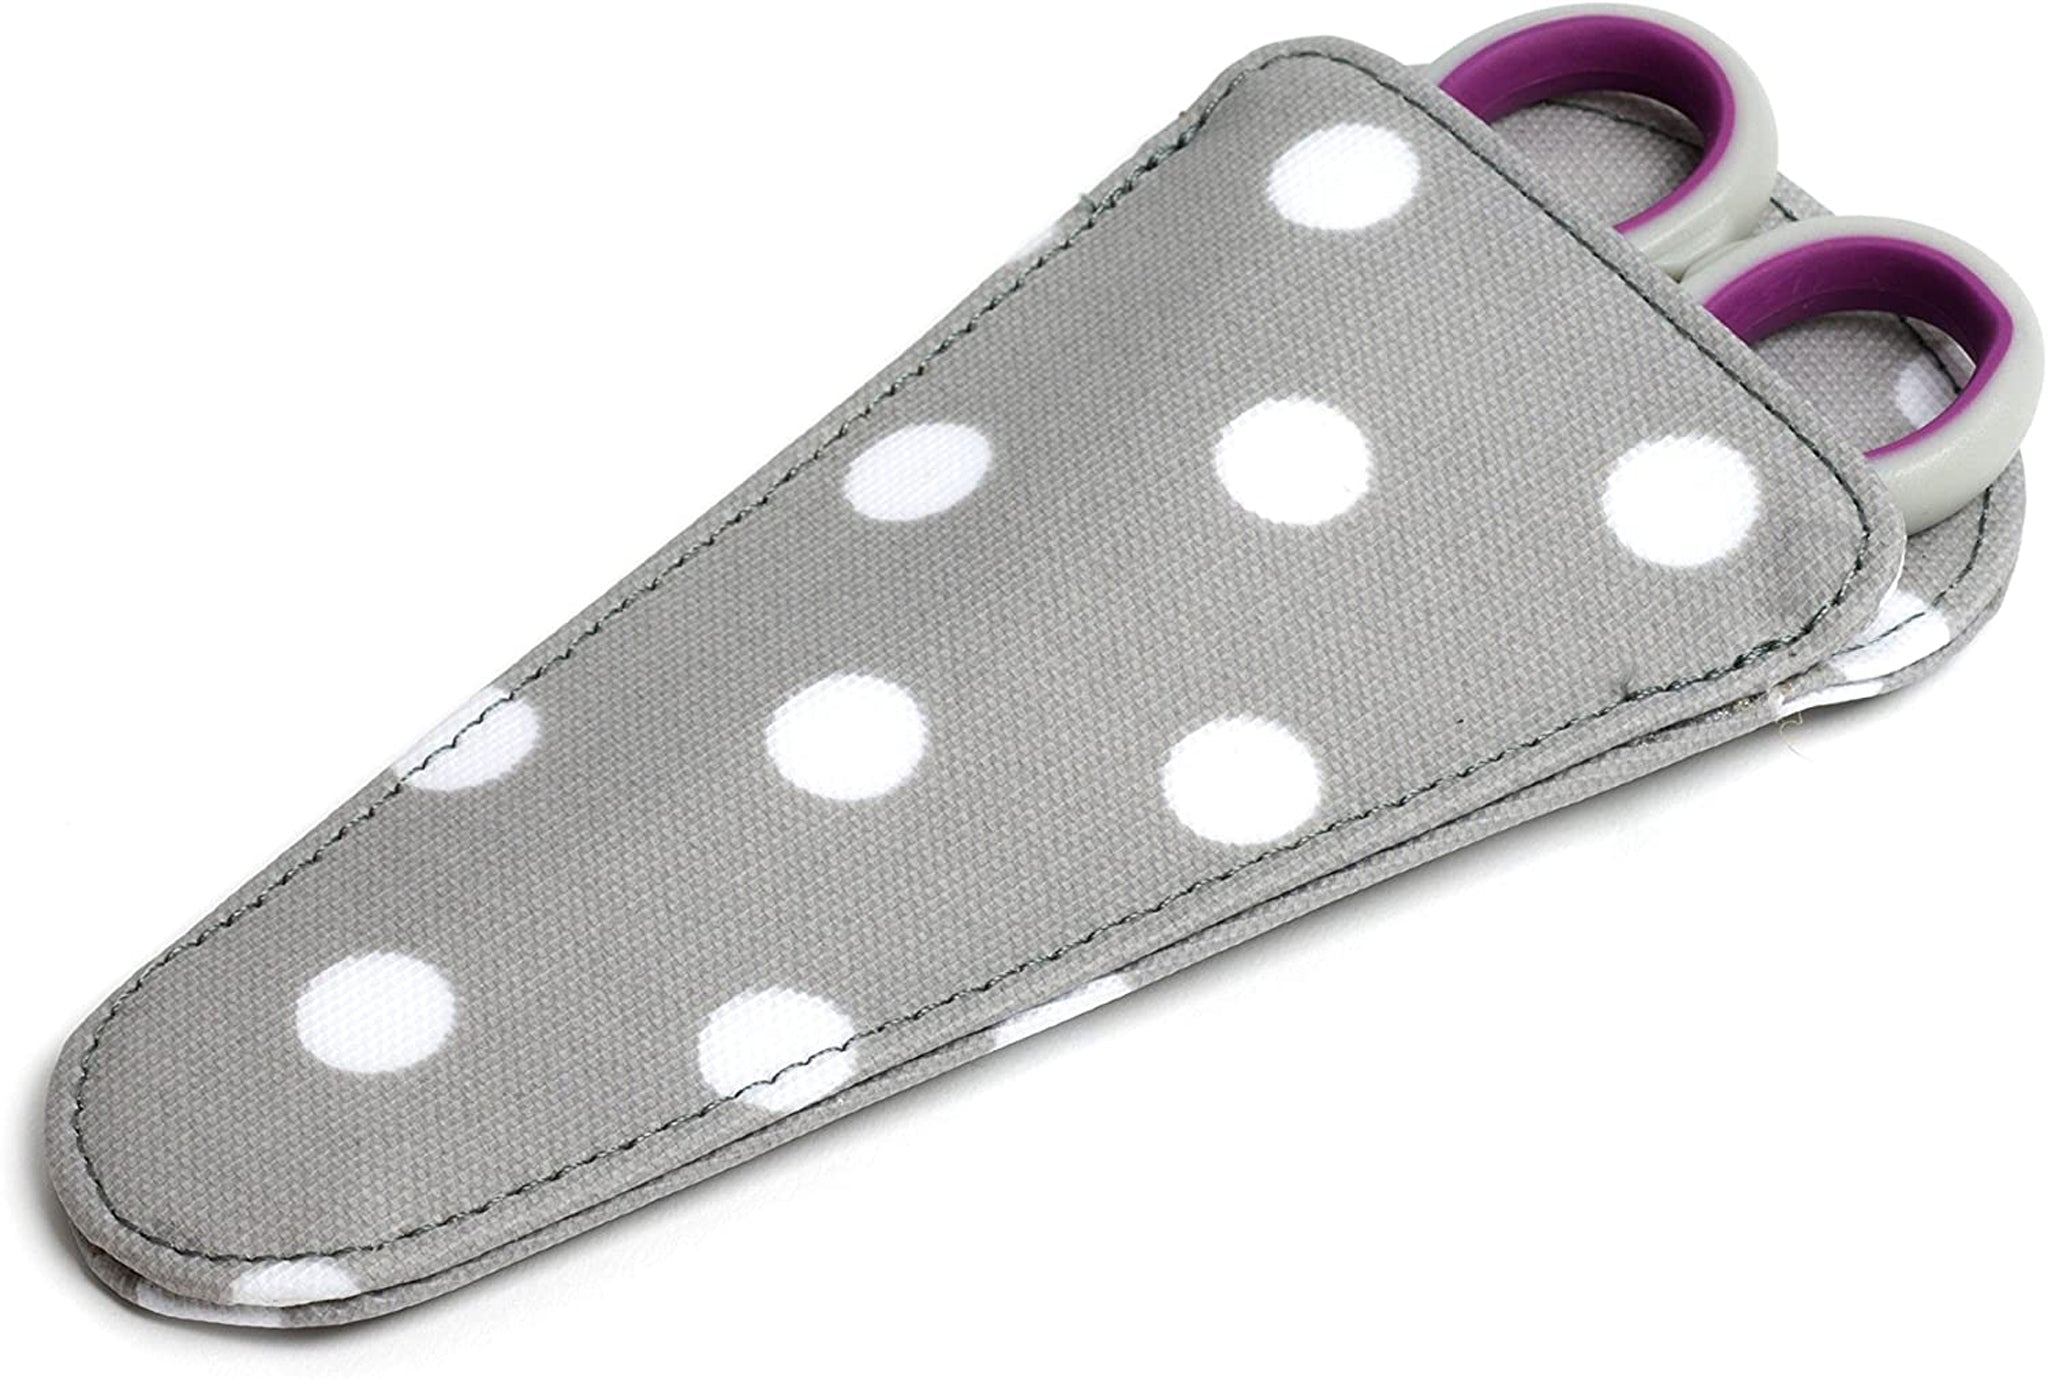 5.5 inch Scissors and Case Grey Spotty Soft Grip - Hobby Gift